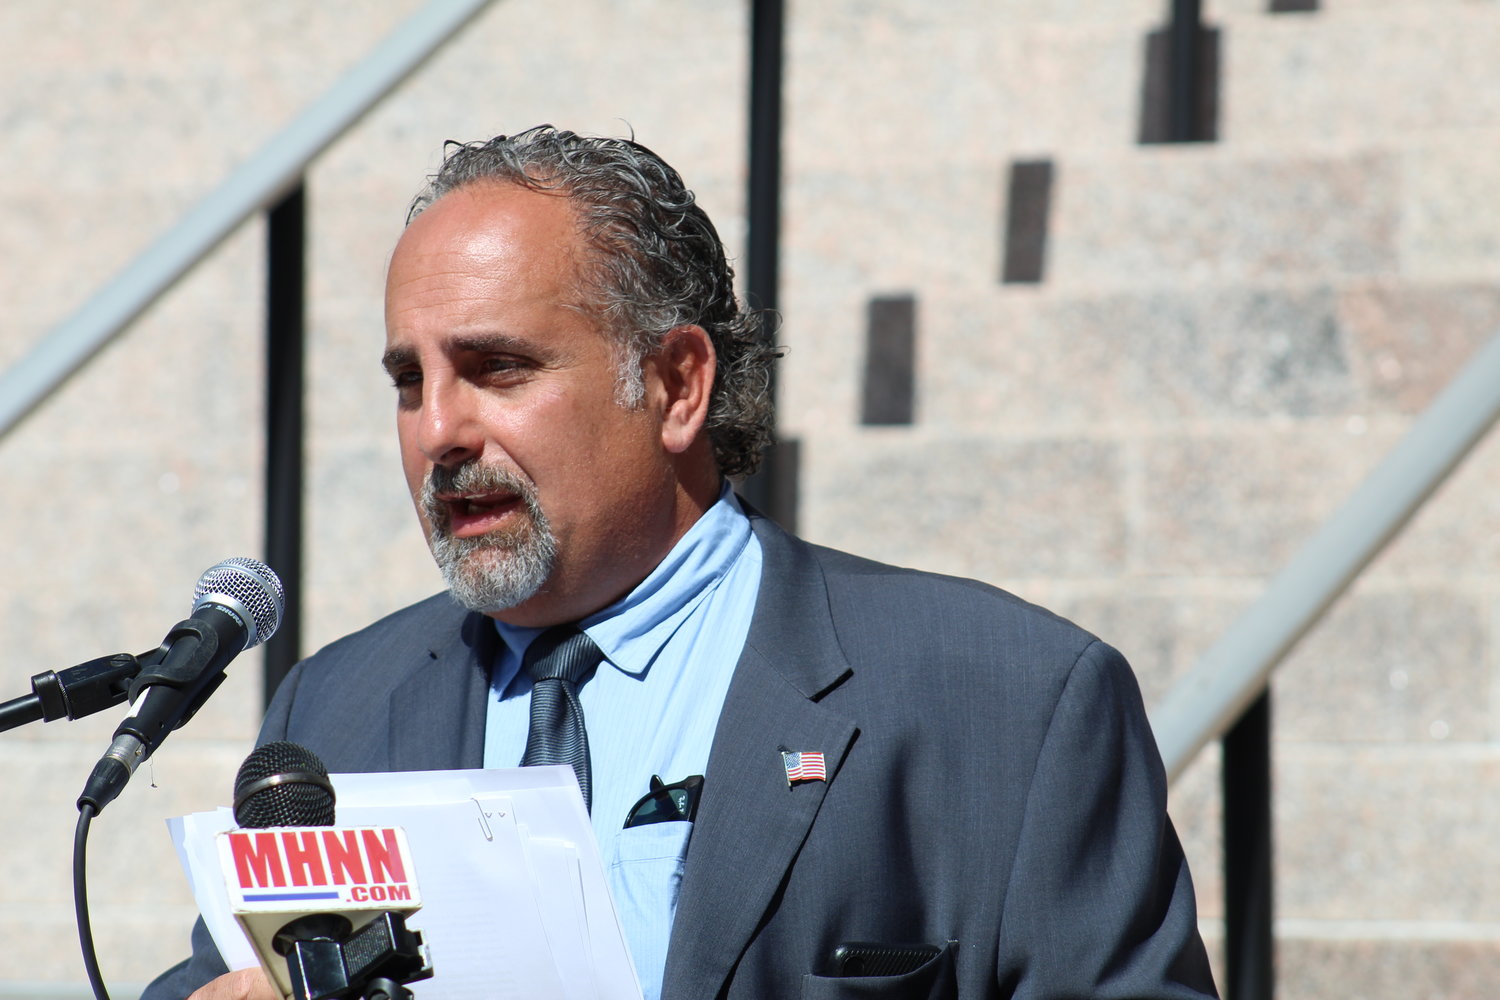 Sullivan County Democratic Committee chairman Steven Vegliante speaks at last Tuesday’s press conference in front the Lawrence H. Cooke Sullivan County Courthouse in Monticello, NY.